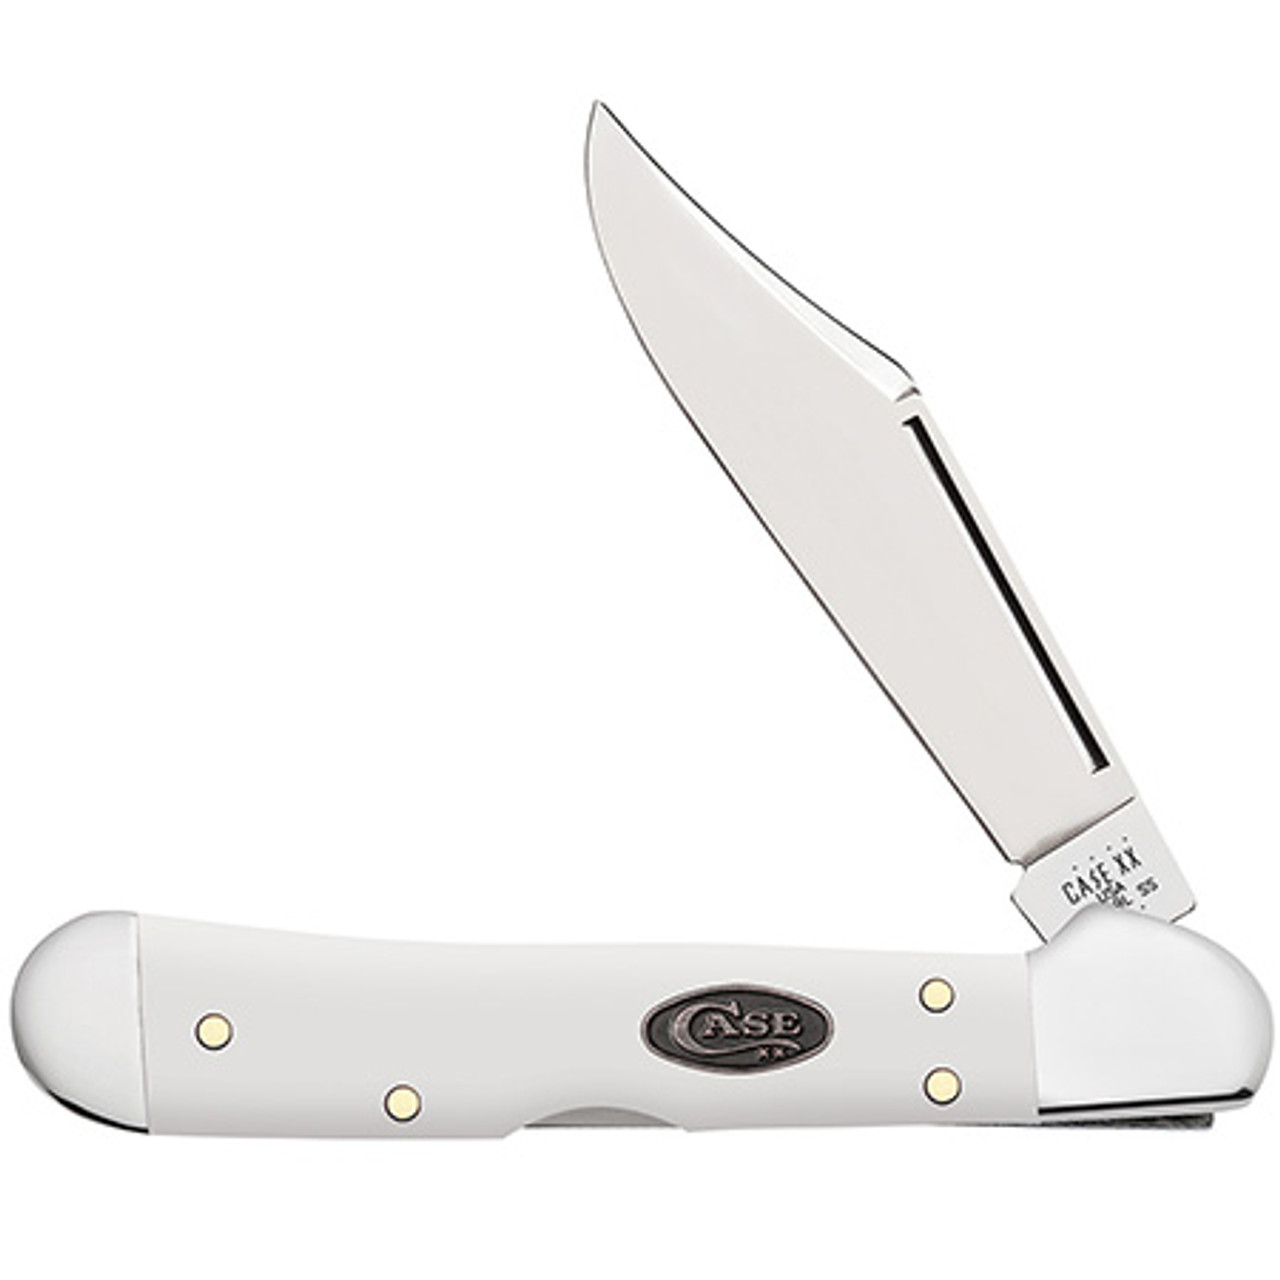 Case Mini Copperlock 63963 - Tru-Sharp Stainless Steel Clip Blade, White Synthetic Handle (41749L SS)